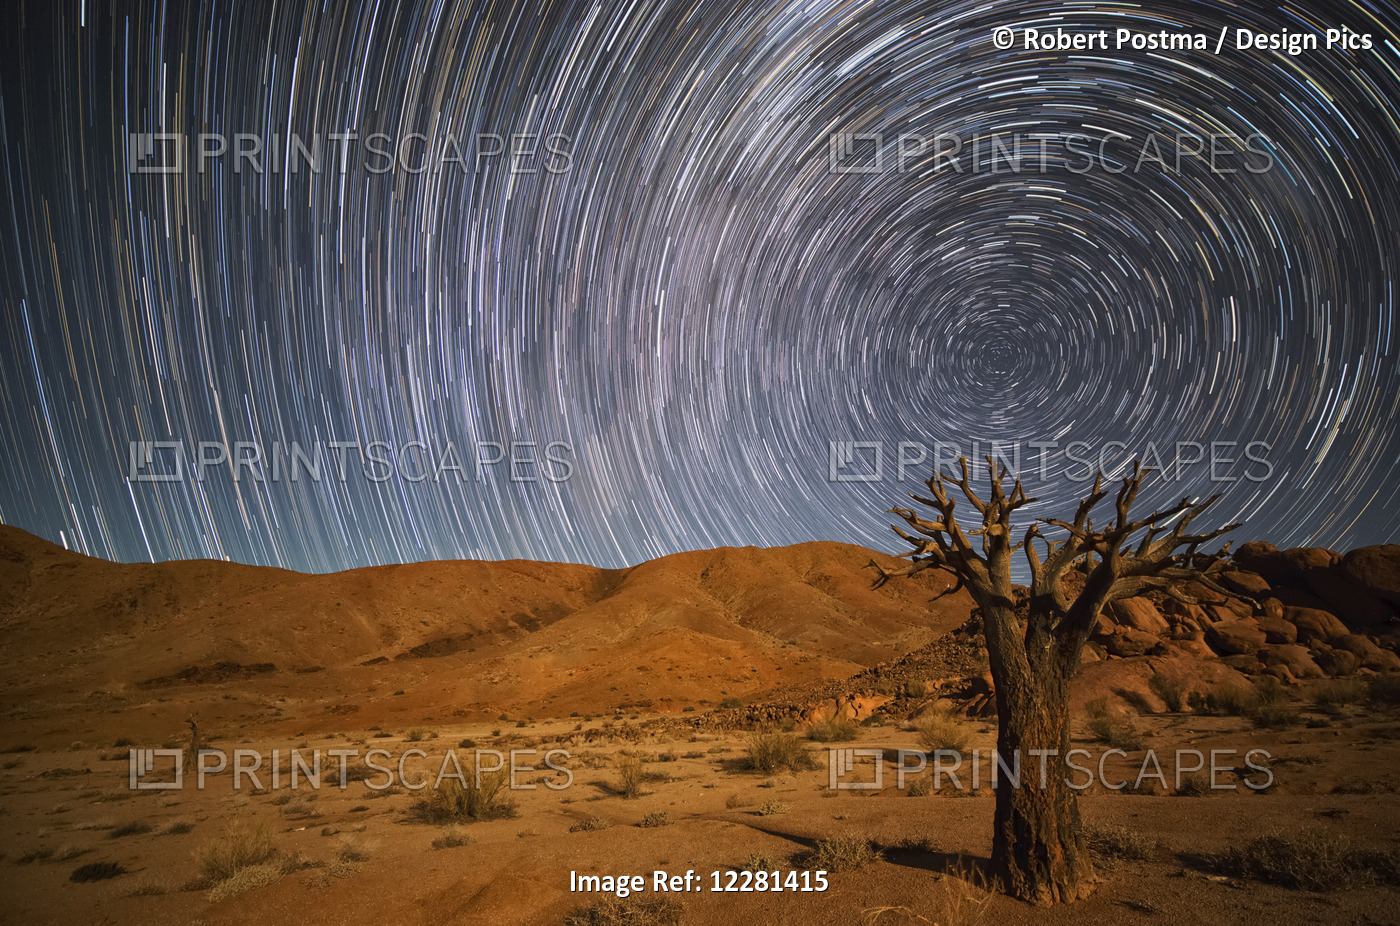 Richtersveld National Park With Dead Kookerboom Tree And Star Trails In The ...